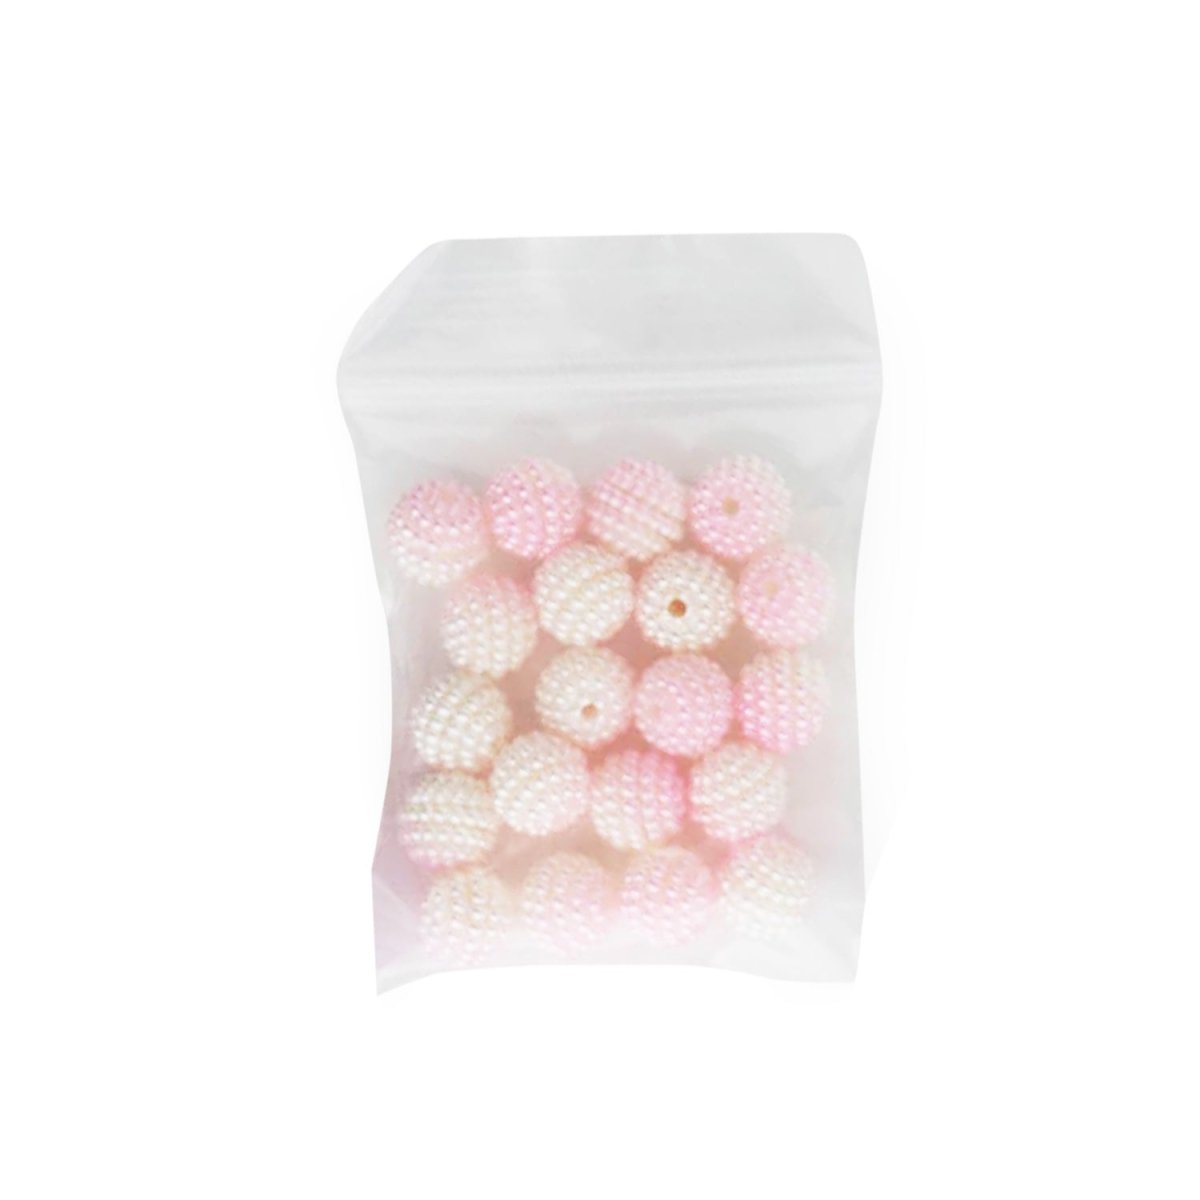 Acrylic Round Beads Ombre Pearl Berry Rhinestones 12mm Pink Pearl from Cara & Co Craft Supply